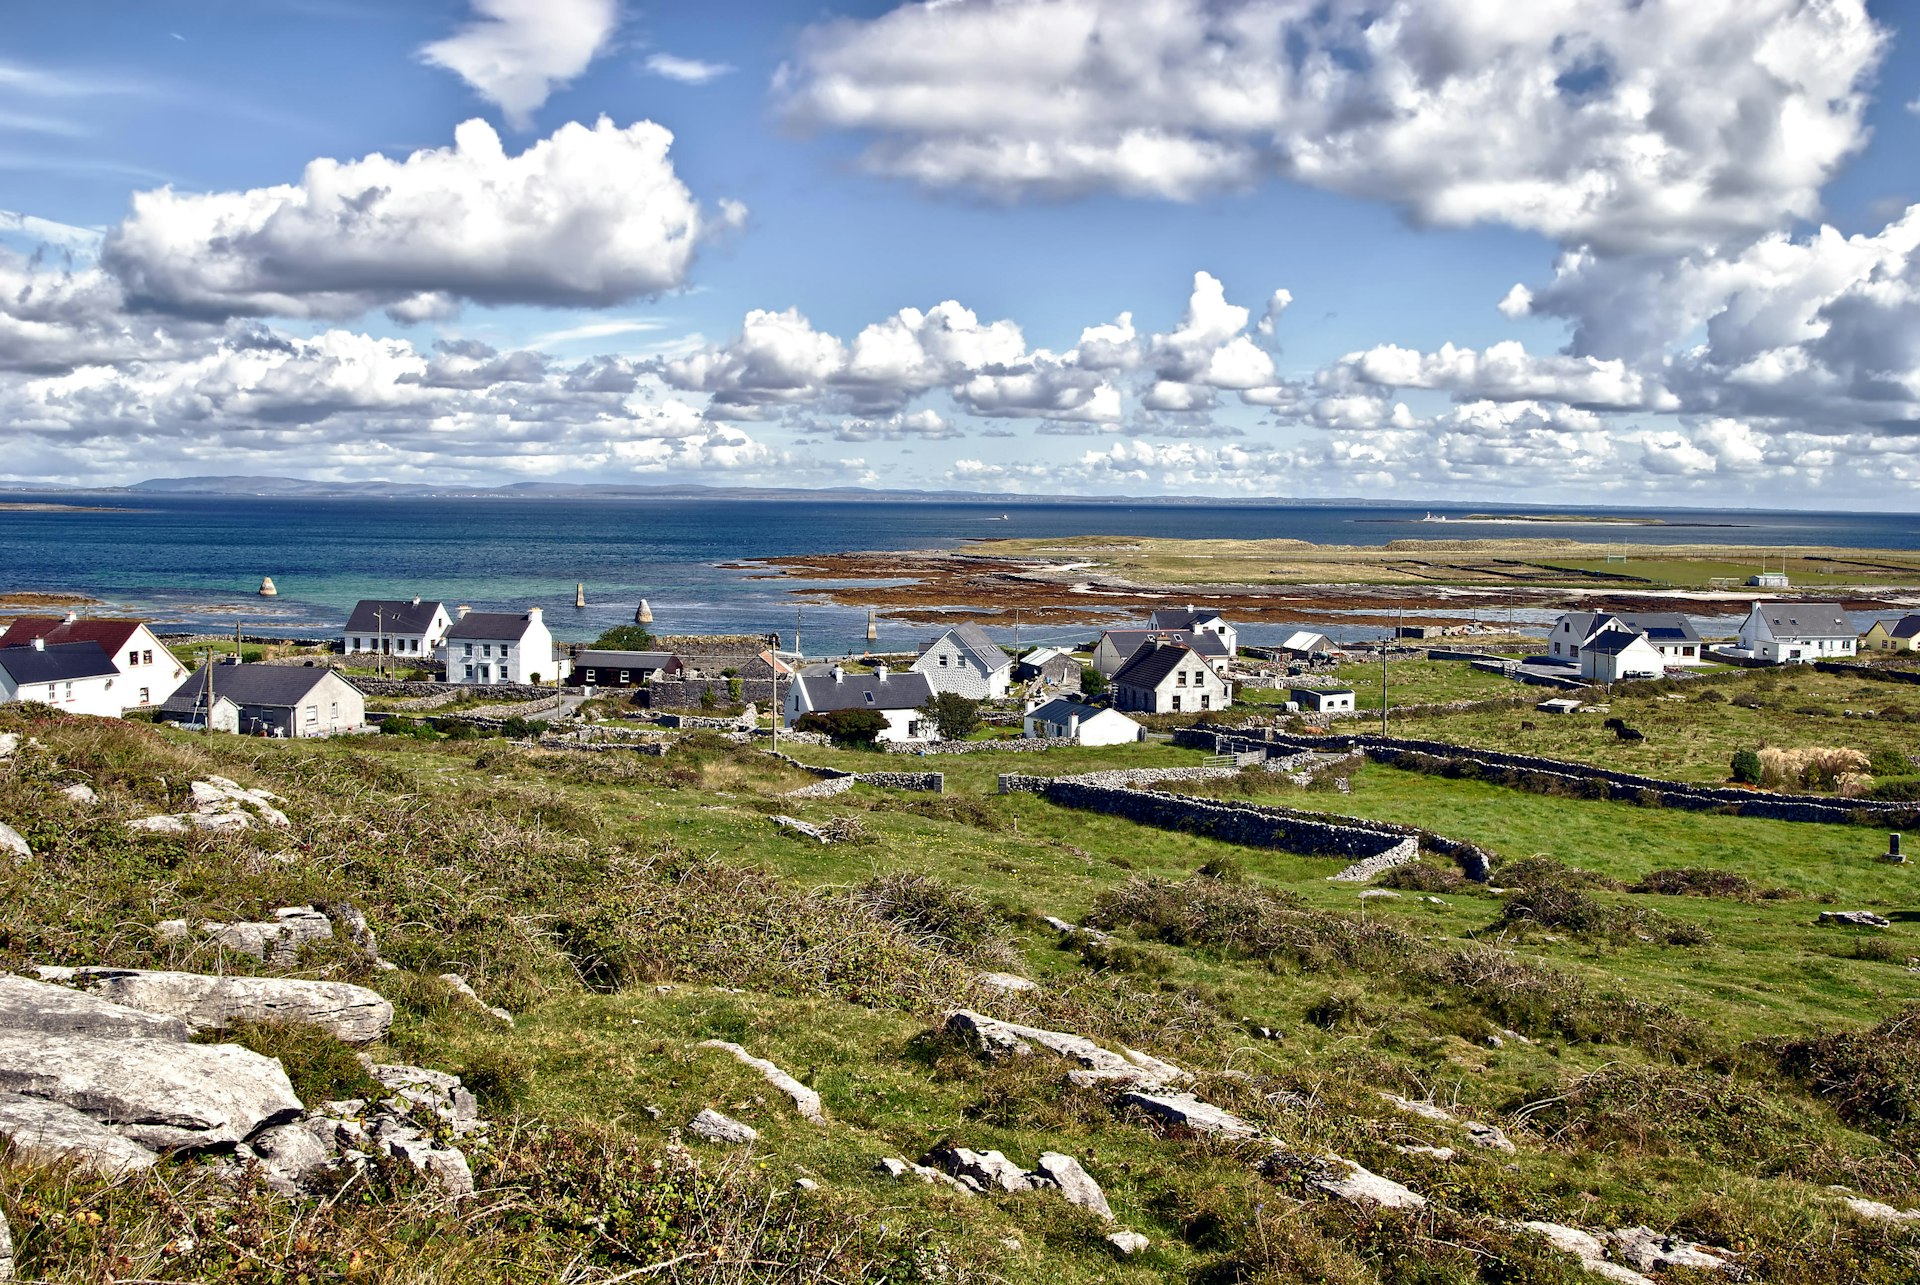 A cluster of white coastal cottages right by a windswept beach